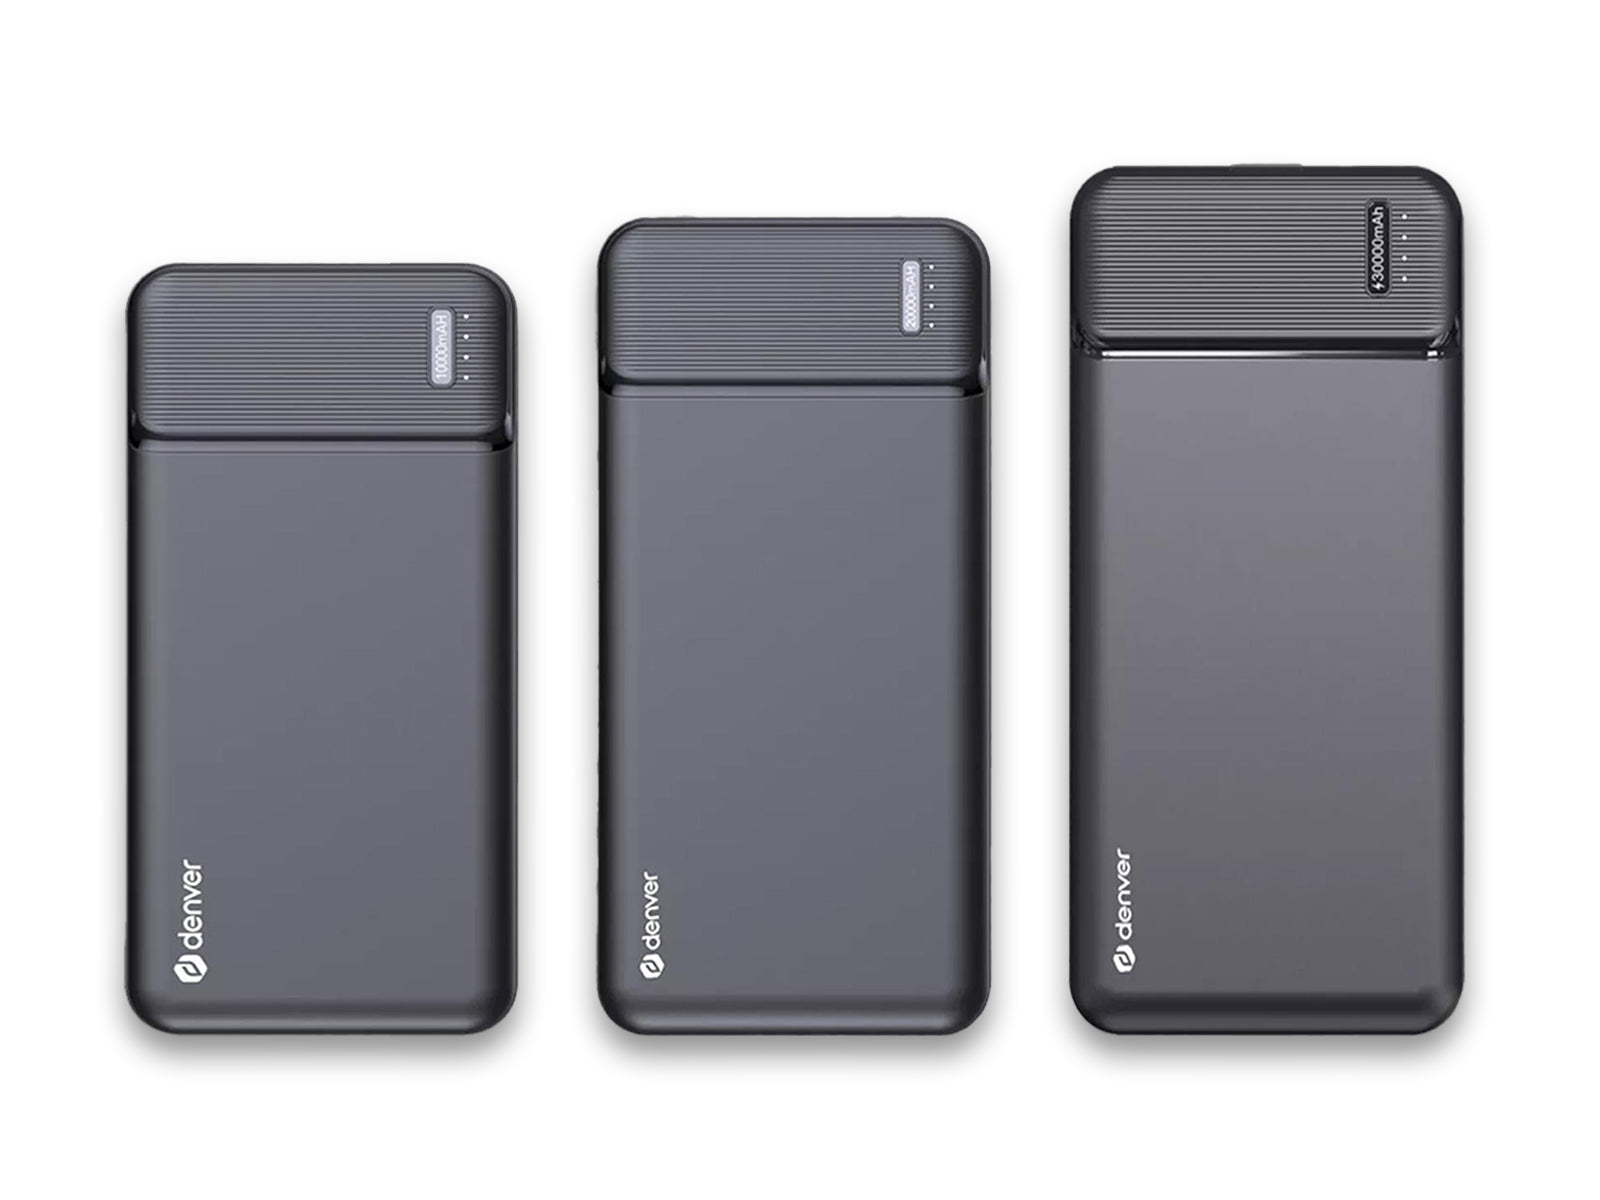 Image shows all 3 of the Denver High Capacity Portable Chargers